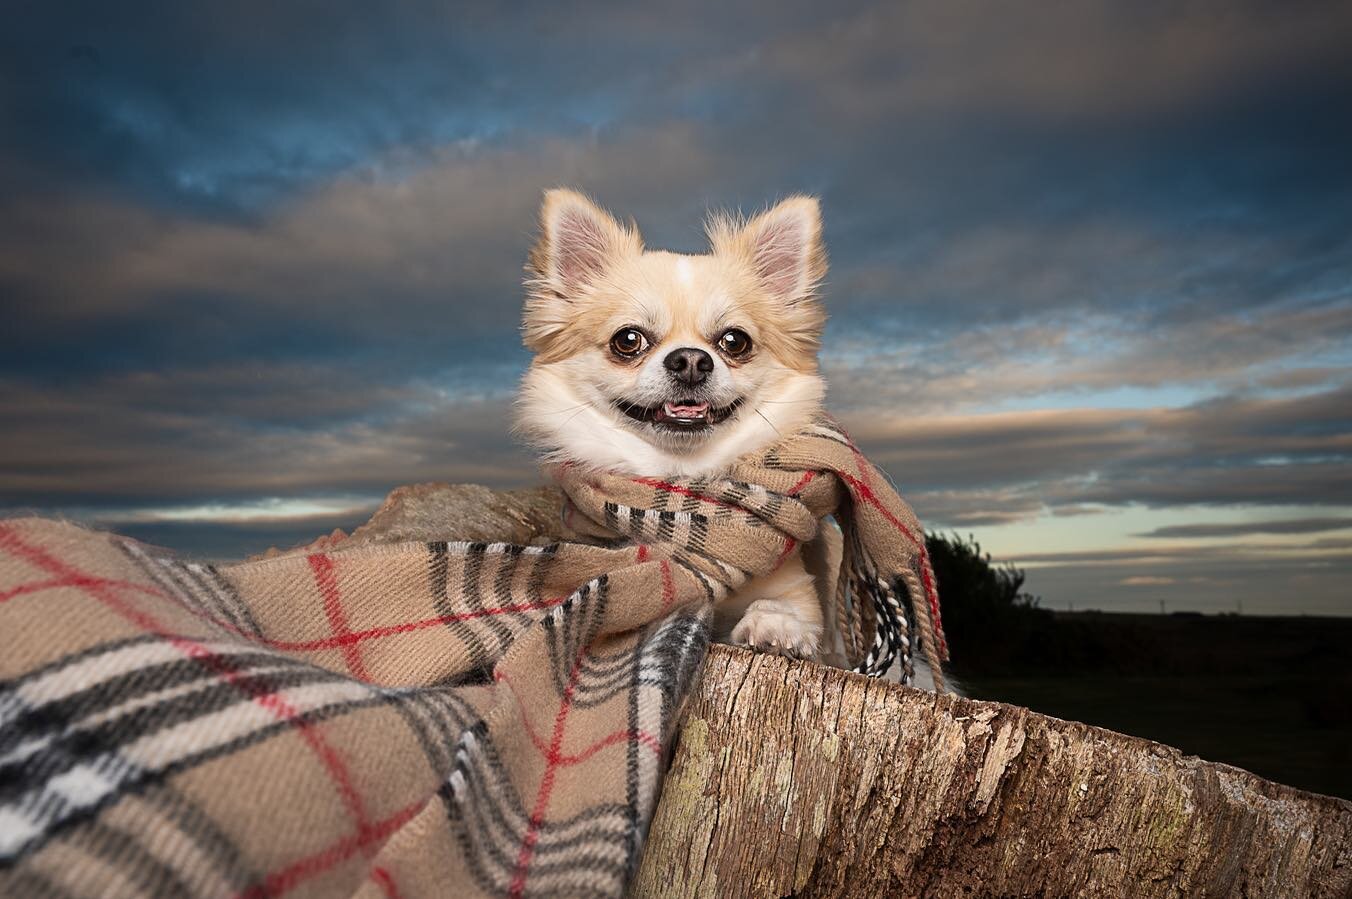 Bear 😍

It&rsquo;s getting colder guys. Time to grab some extra layers&hellip;
 Brrrr 🥶

🐾

#winterscoming❄️ #cosydog #dogsofinstagram #chihuahuasofinstagram #chihuahualove #dogphotographyobsession #dogphotography #aberdeenshire #aberdeenshiredogp